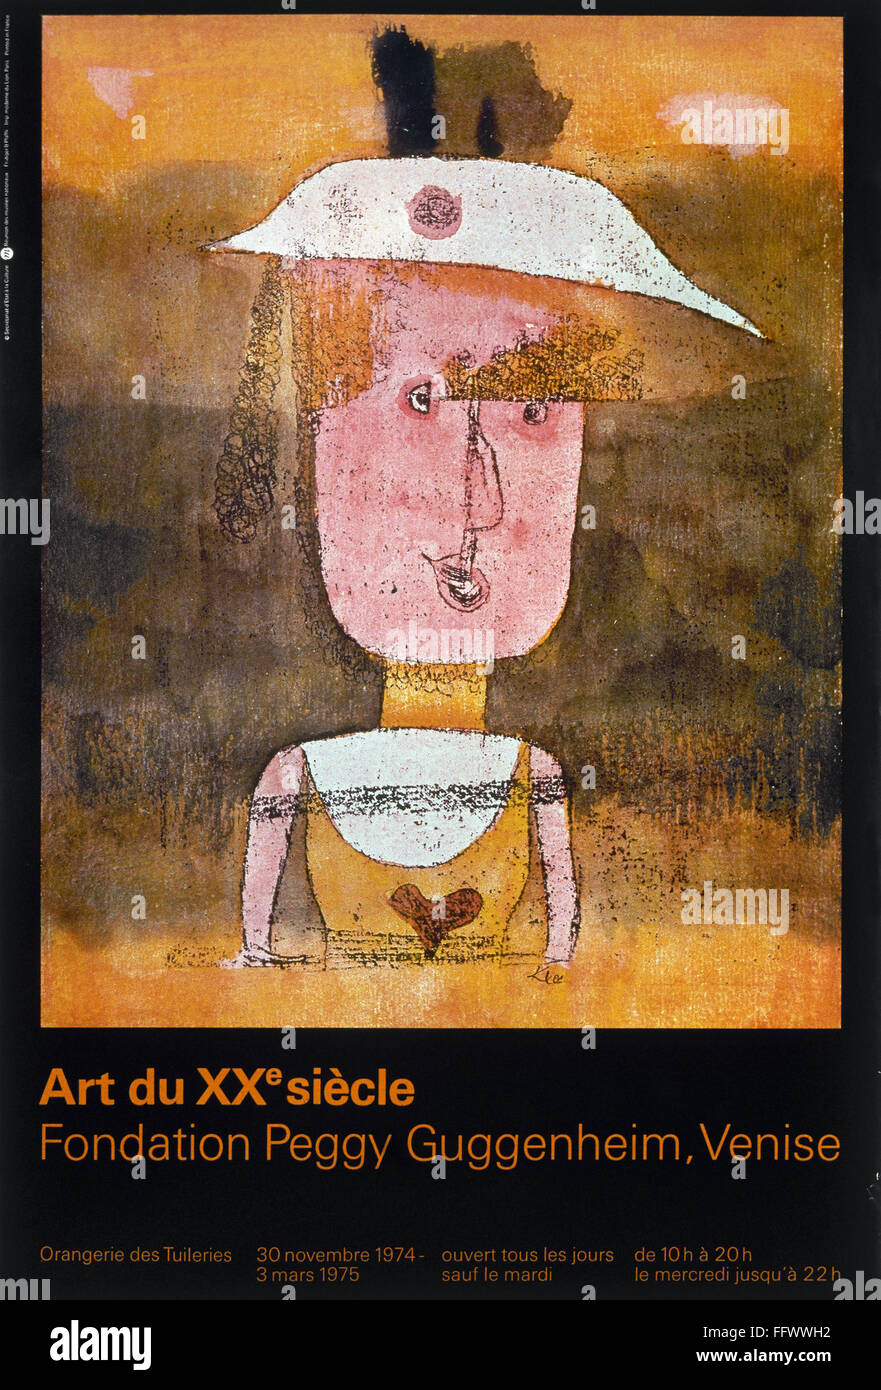 PAUL KLEE: POSTER, 1974. /nA painting by Paul Klee on a poster for an exhbition, 1974, at the Orangerie in the Tuilerie Gardens, Paris, of 20th century art from the Peggy Guggenheim Foundation in Venice. Stock Photo